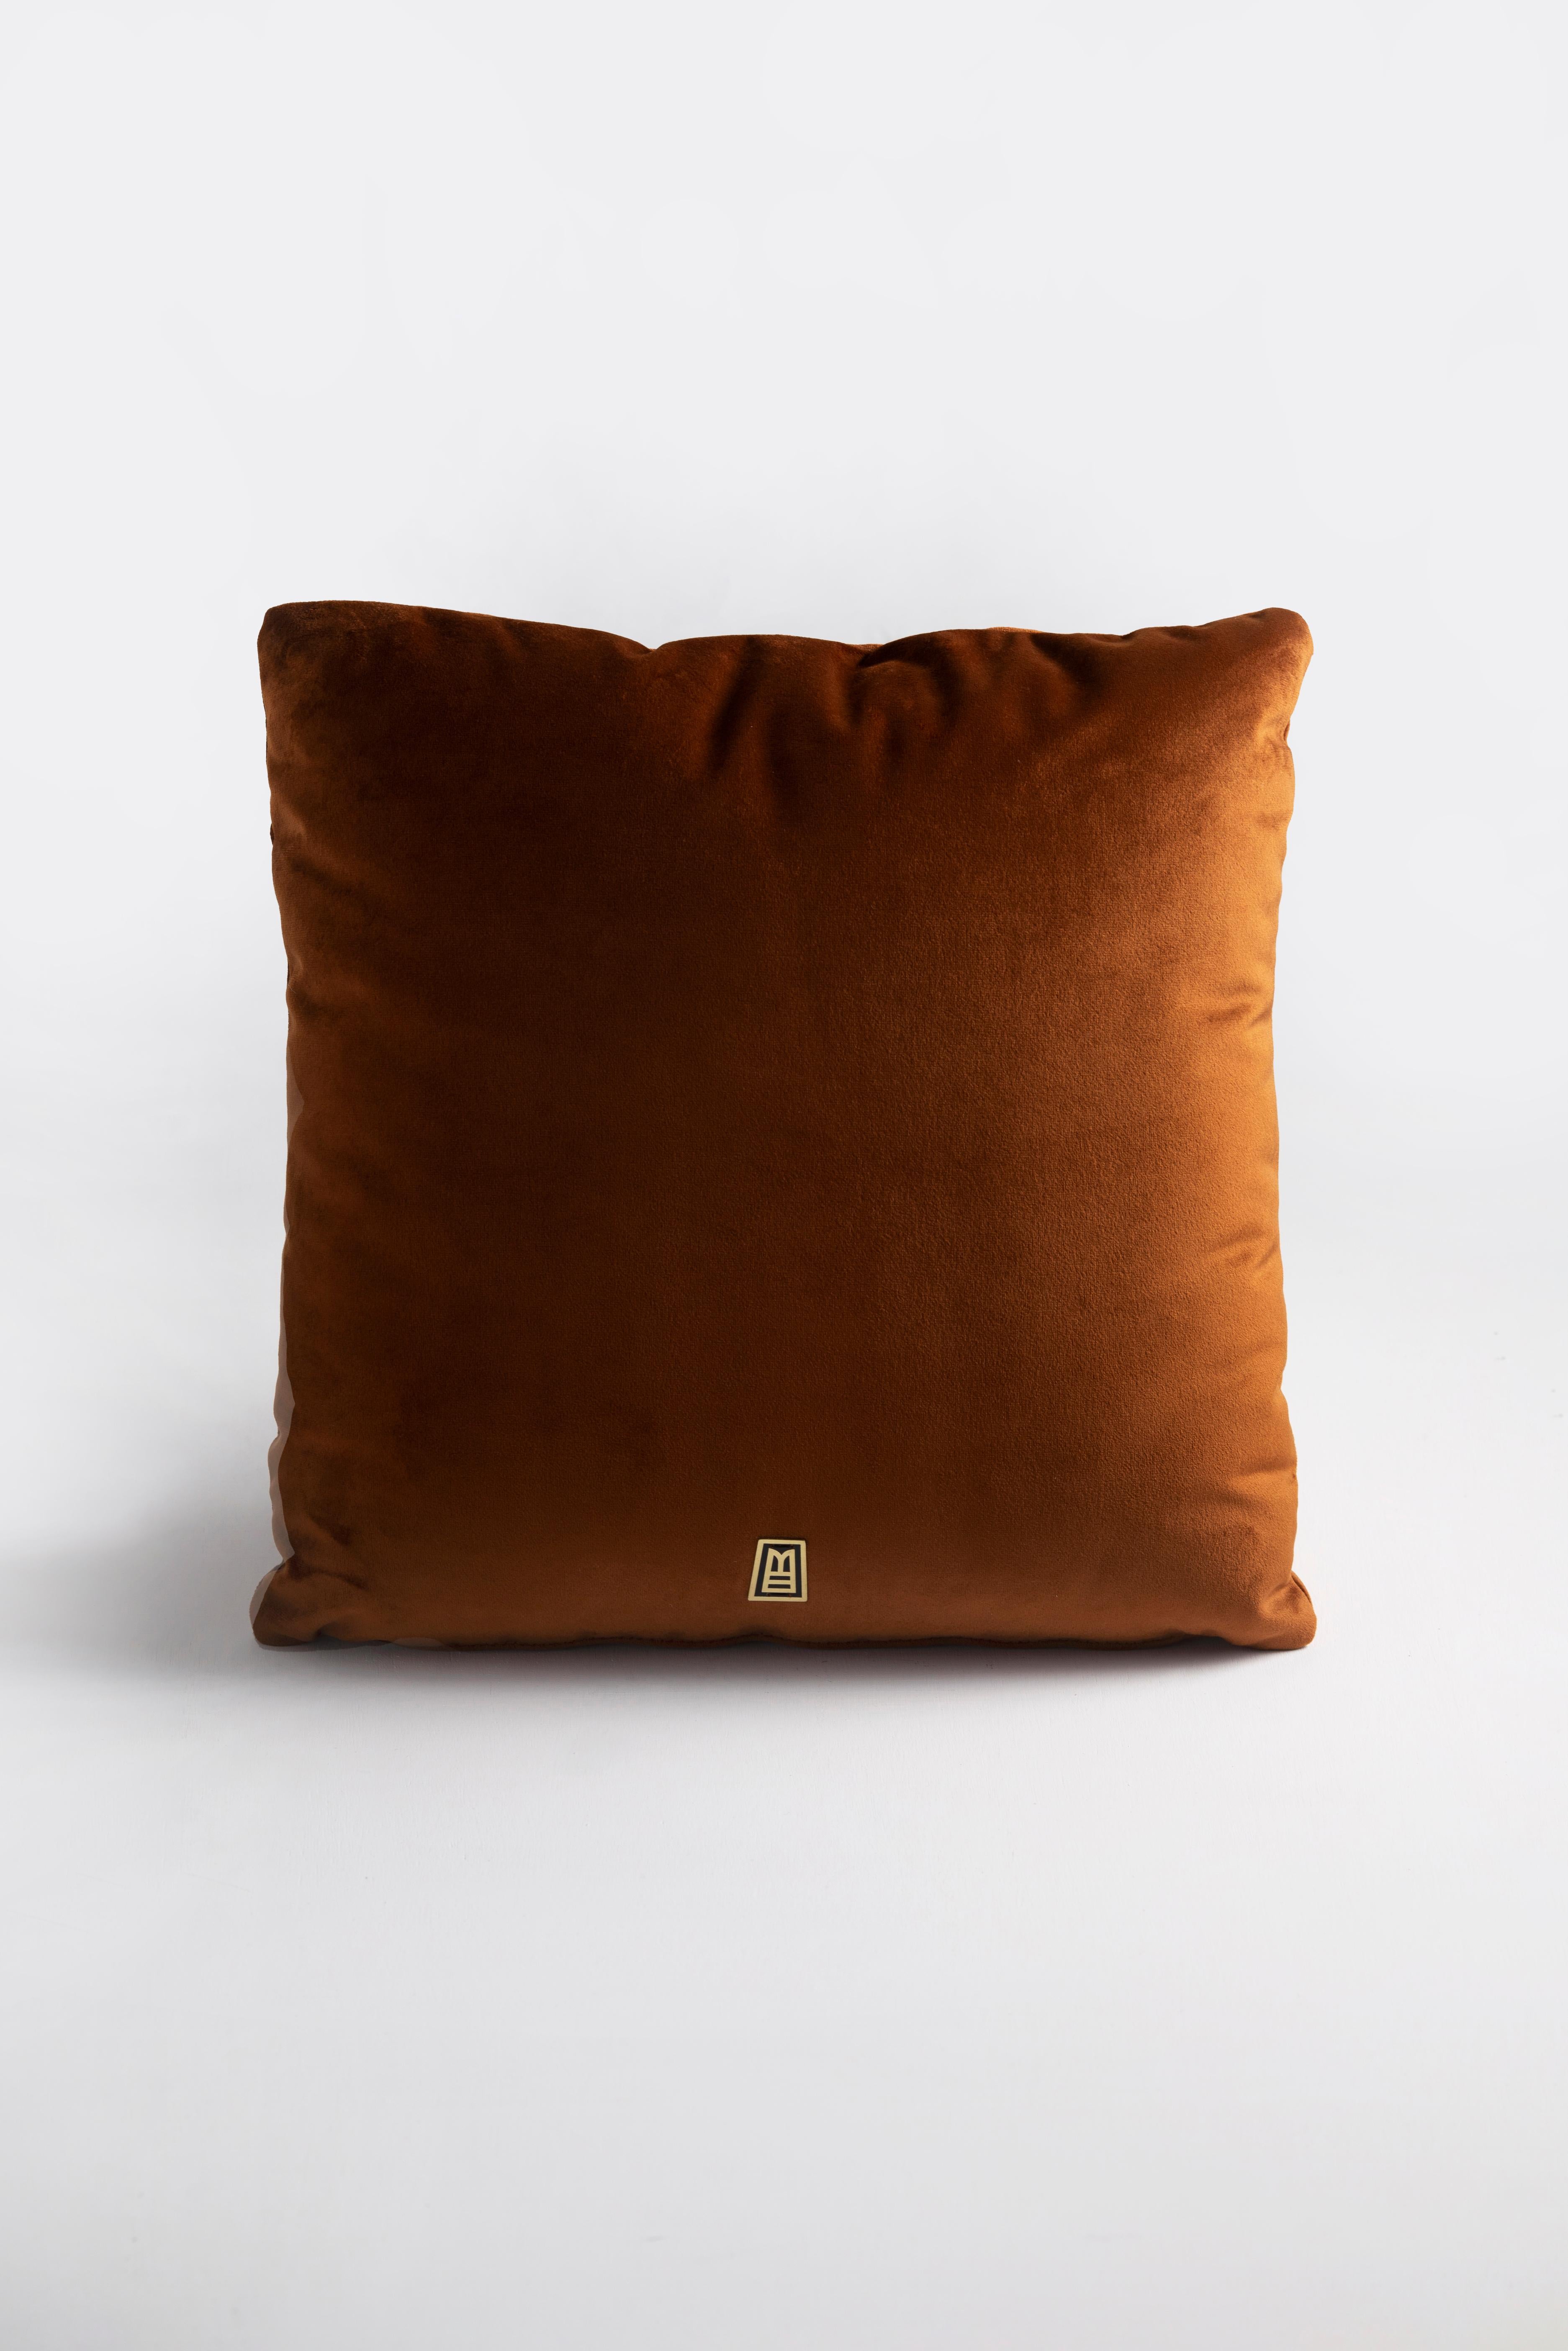 LLAMA Hand Embroidered Decorative Pillows Terracota Velvet by ANDEAN, Set of 2 In New Condition For Sale In Quito, EC